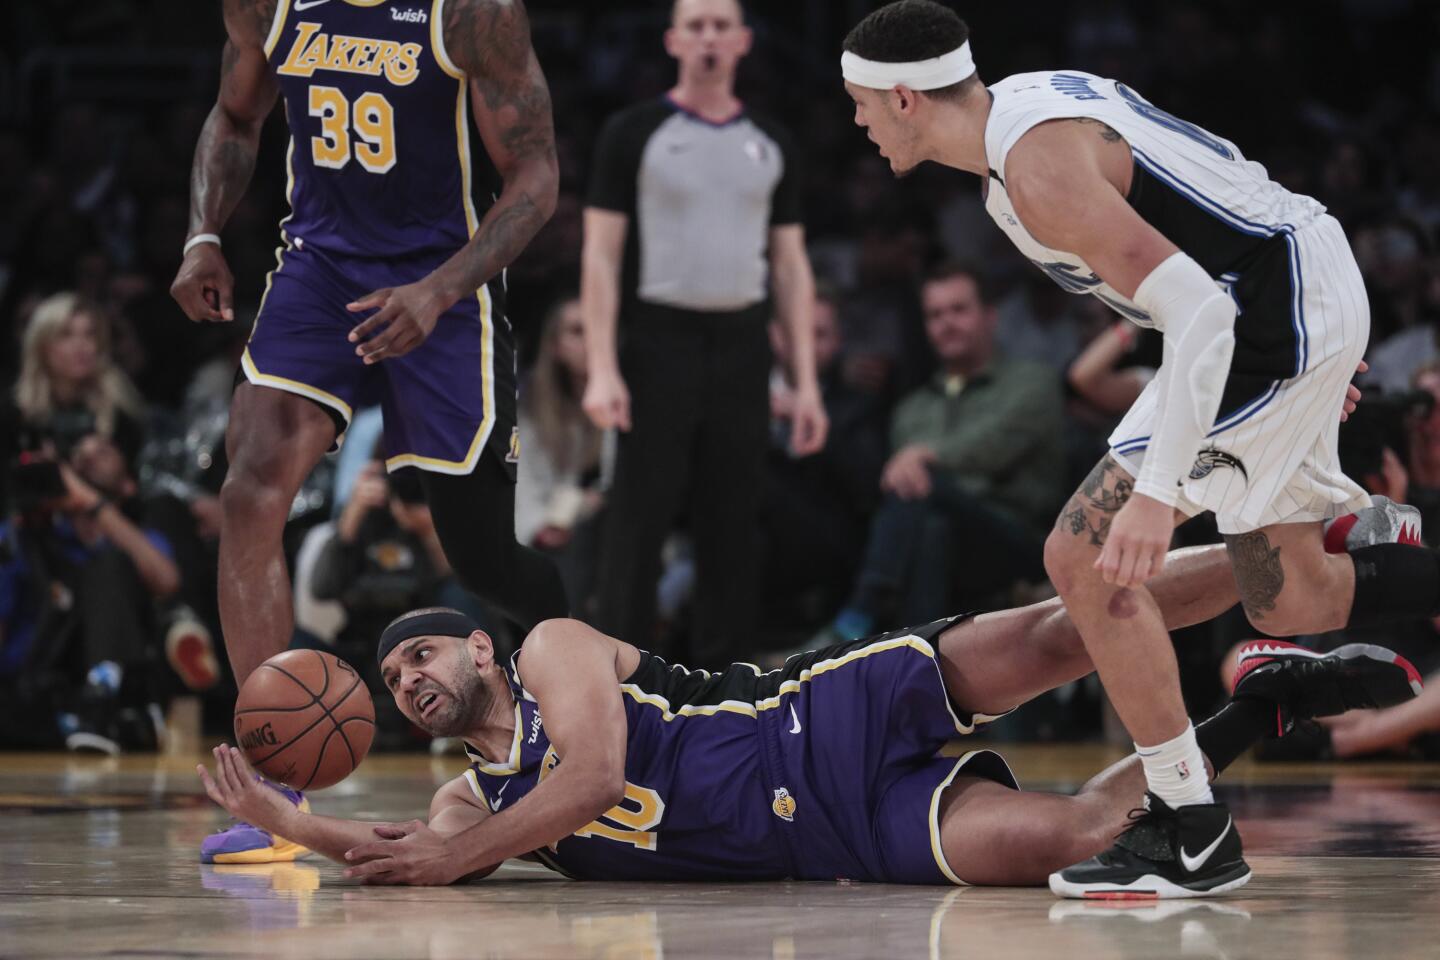 Lakers forward Jared Dudley dives for a loose ball during the first half.